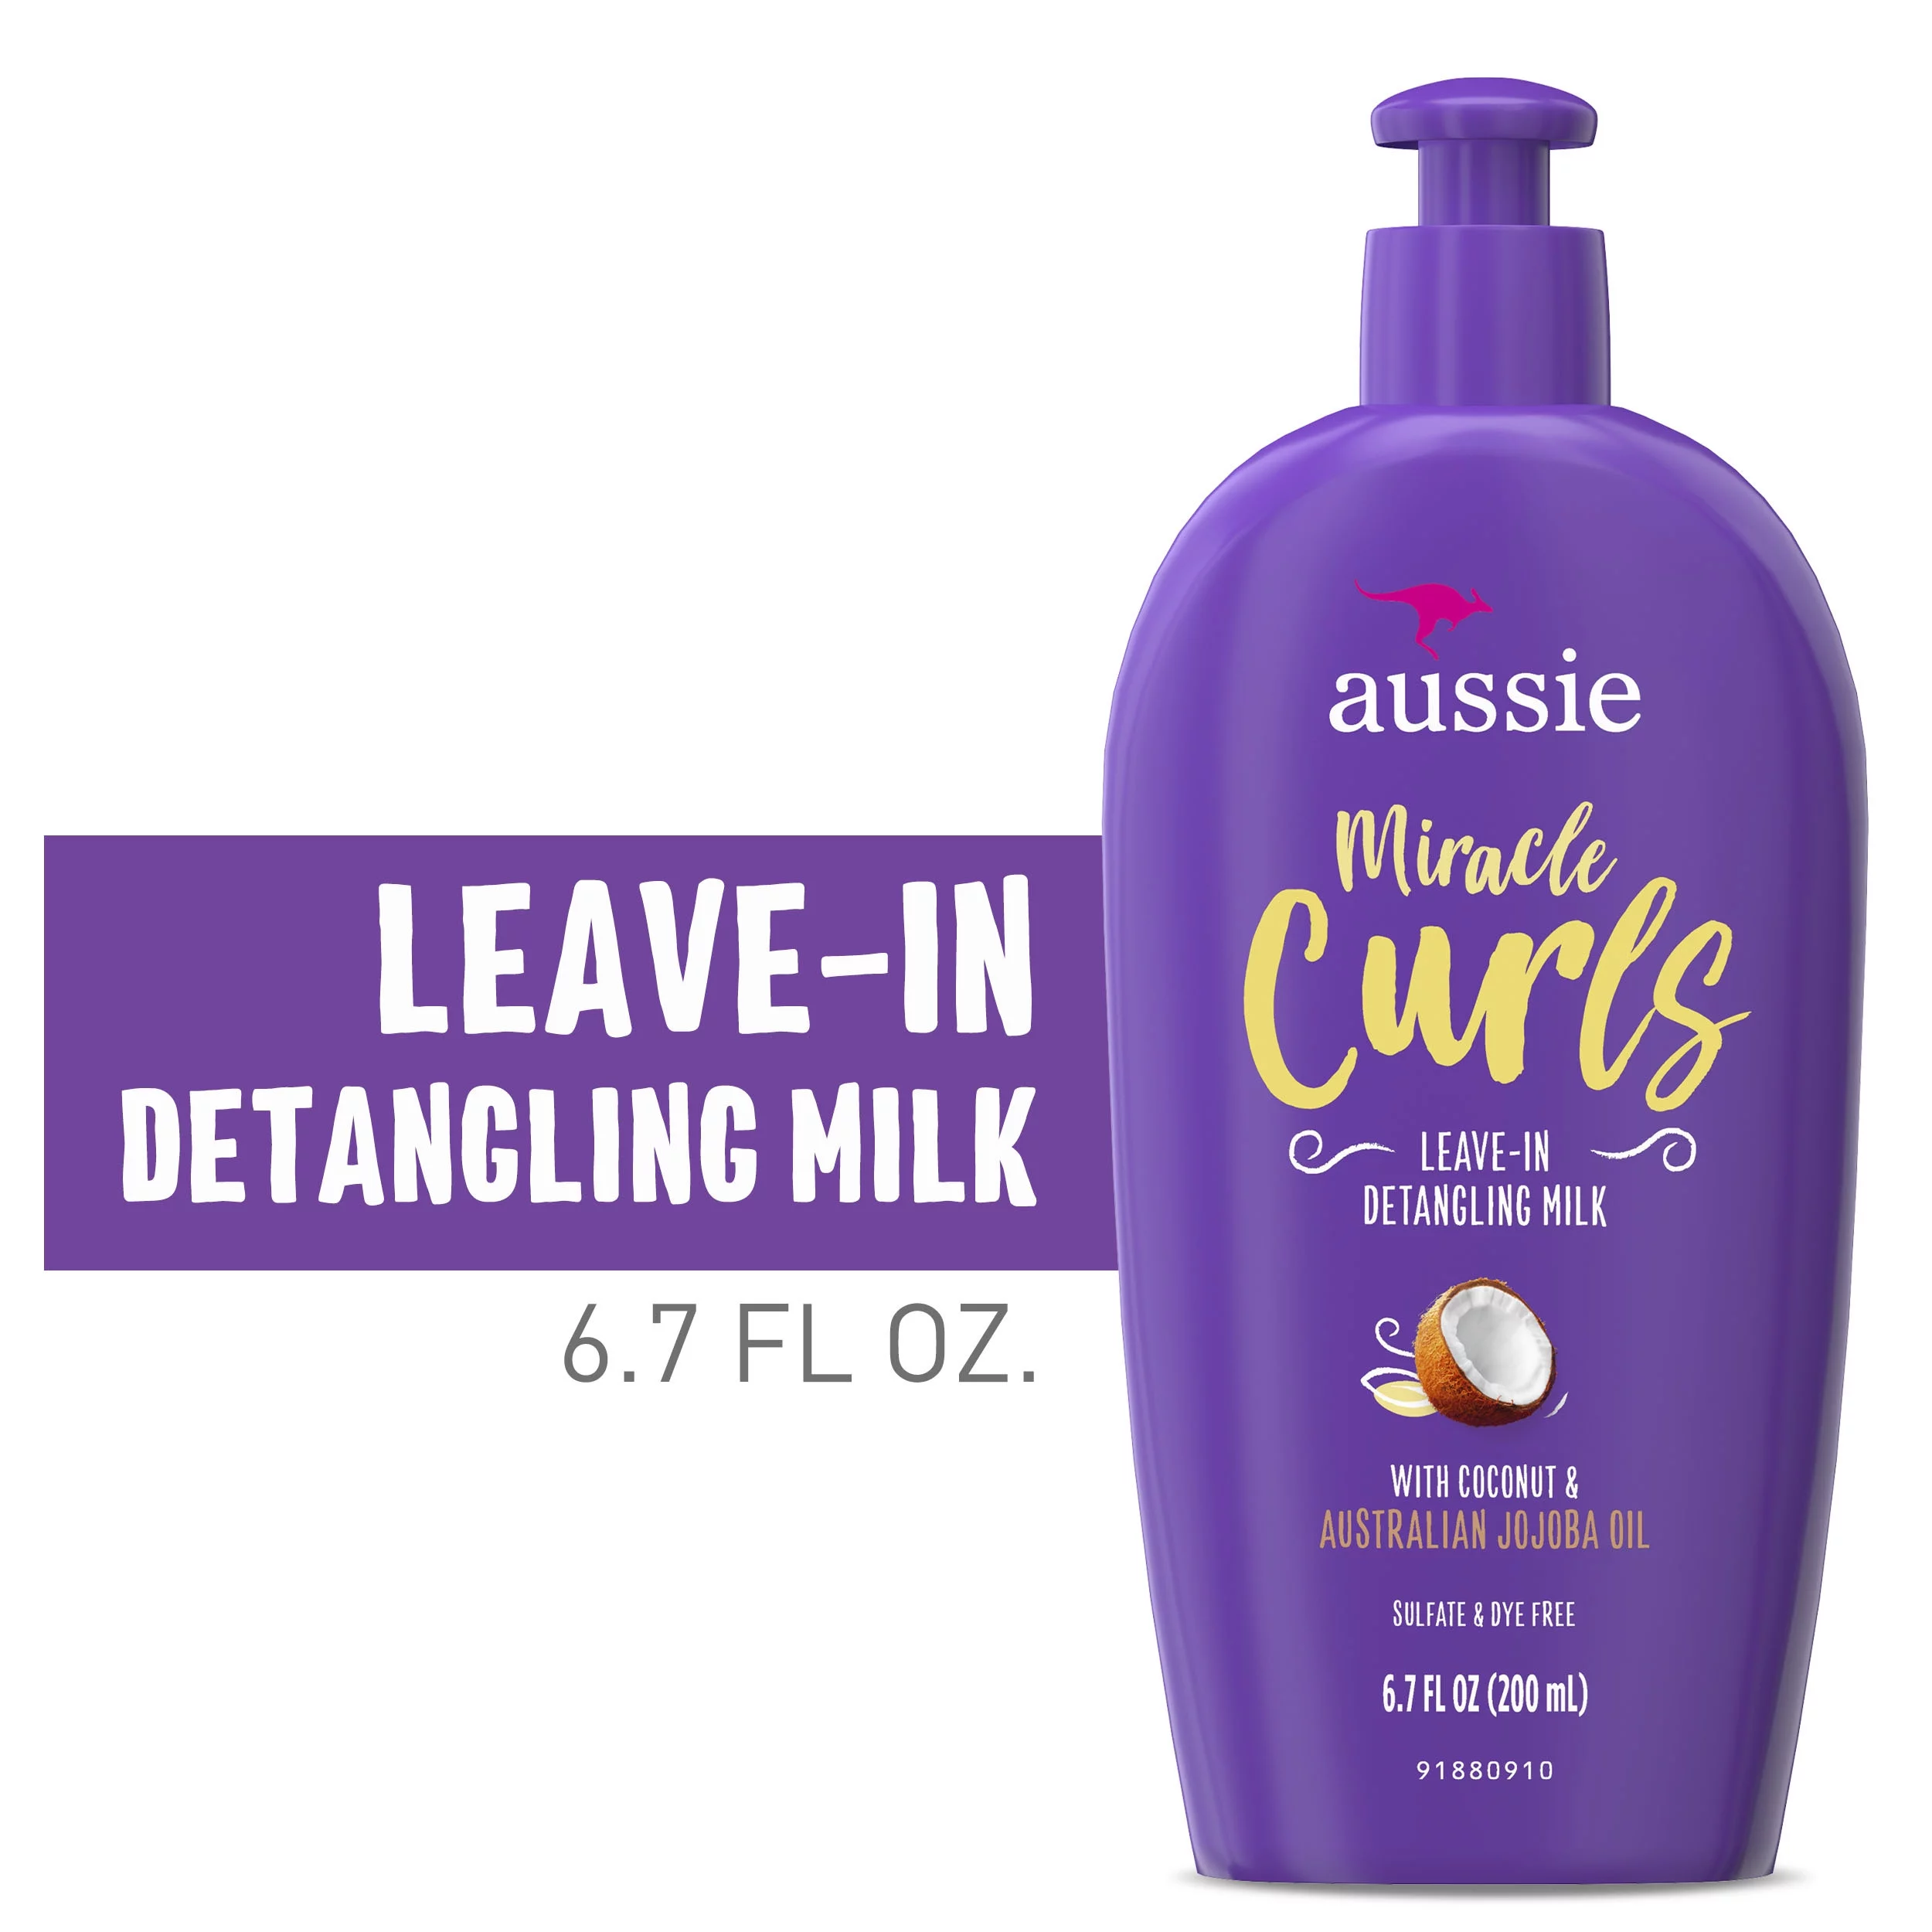 Aussie Miracle Curls Leave-in Detangling Milk, for Curly Hair Types Paraben Free, 6.7 fl oz